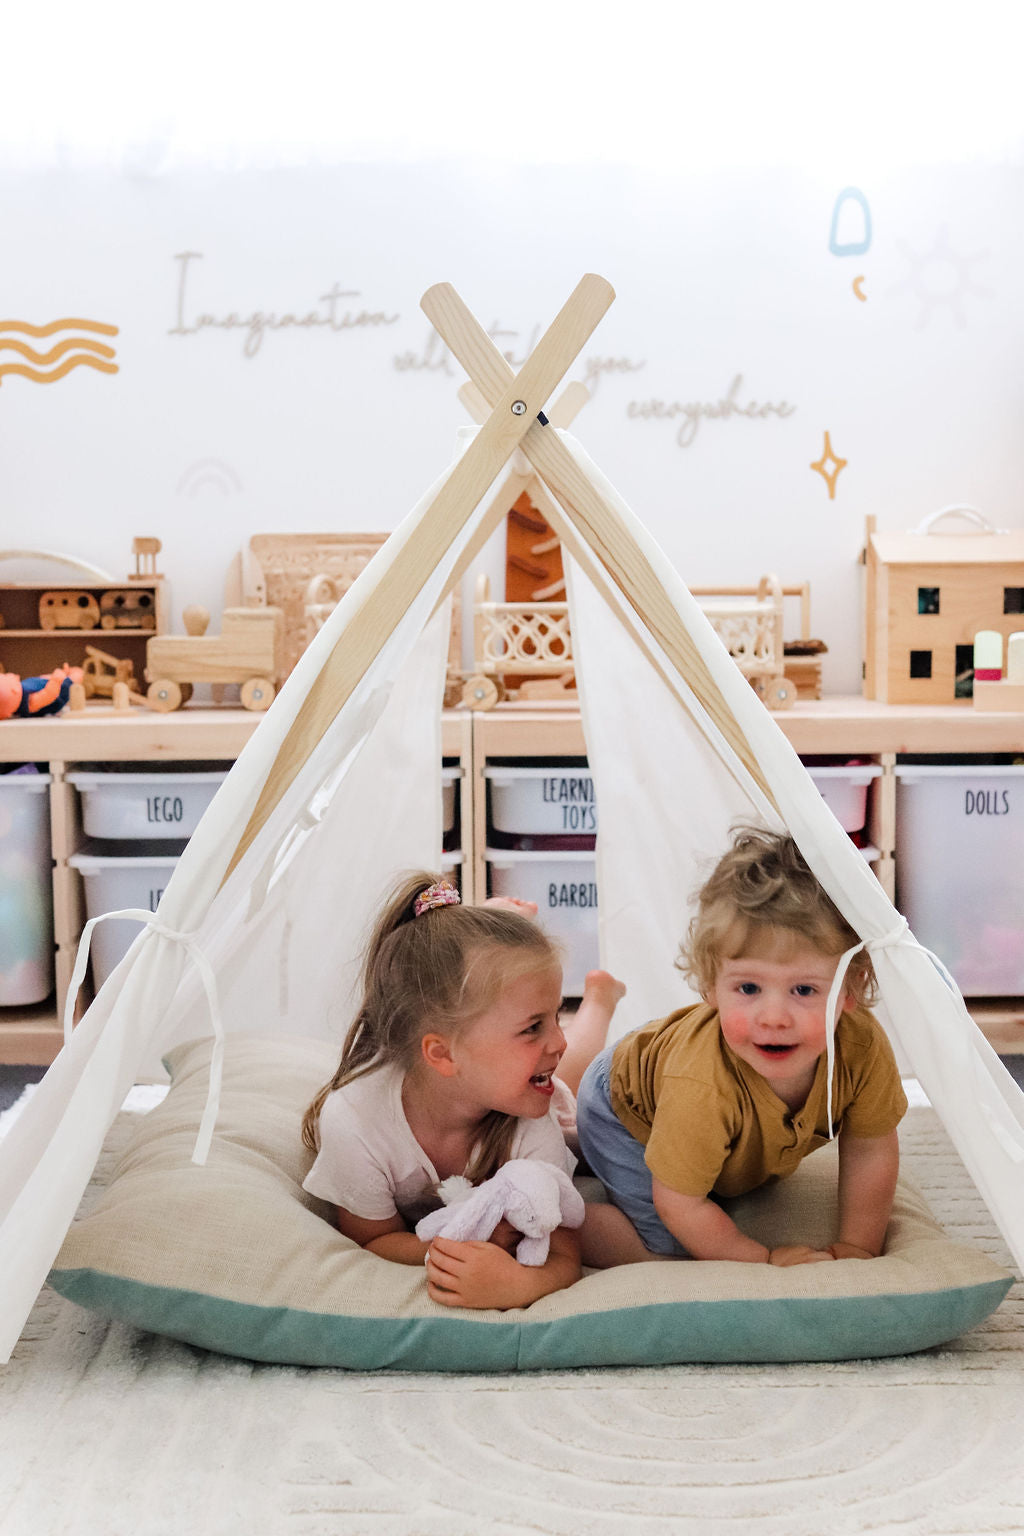 Image of 2 little children sitting below Petite Maison Play Safari Tent cubby on a floor cushion